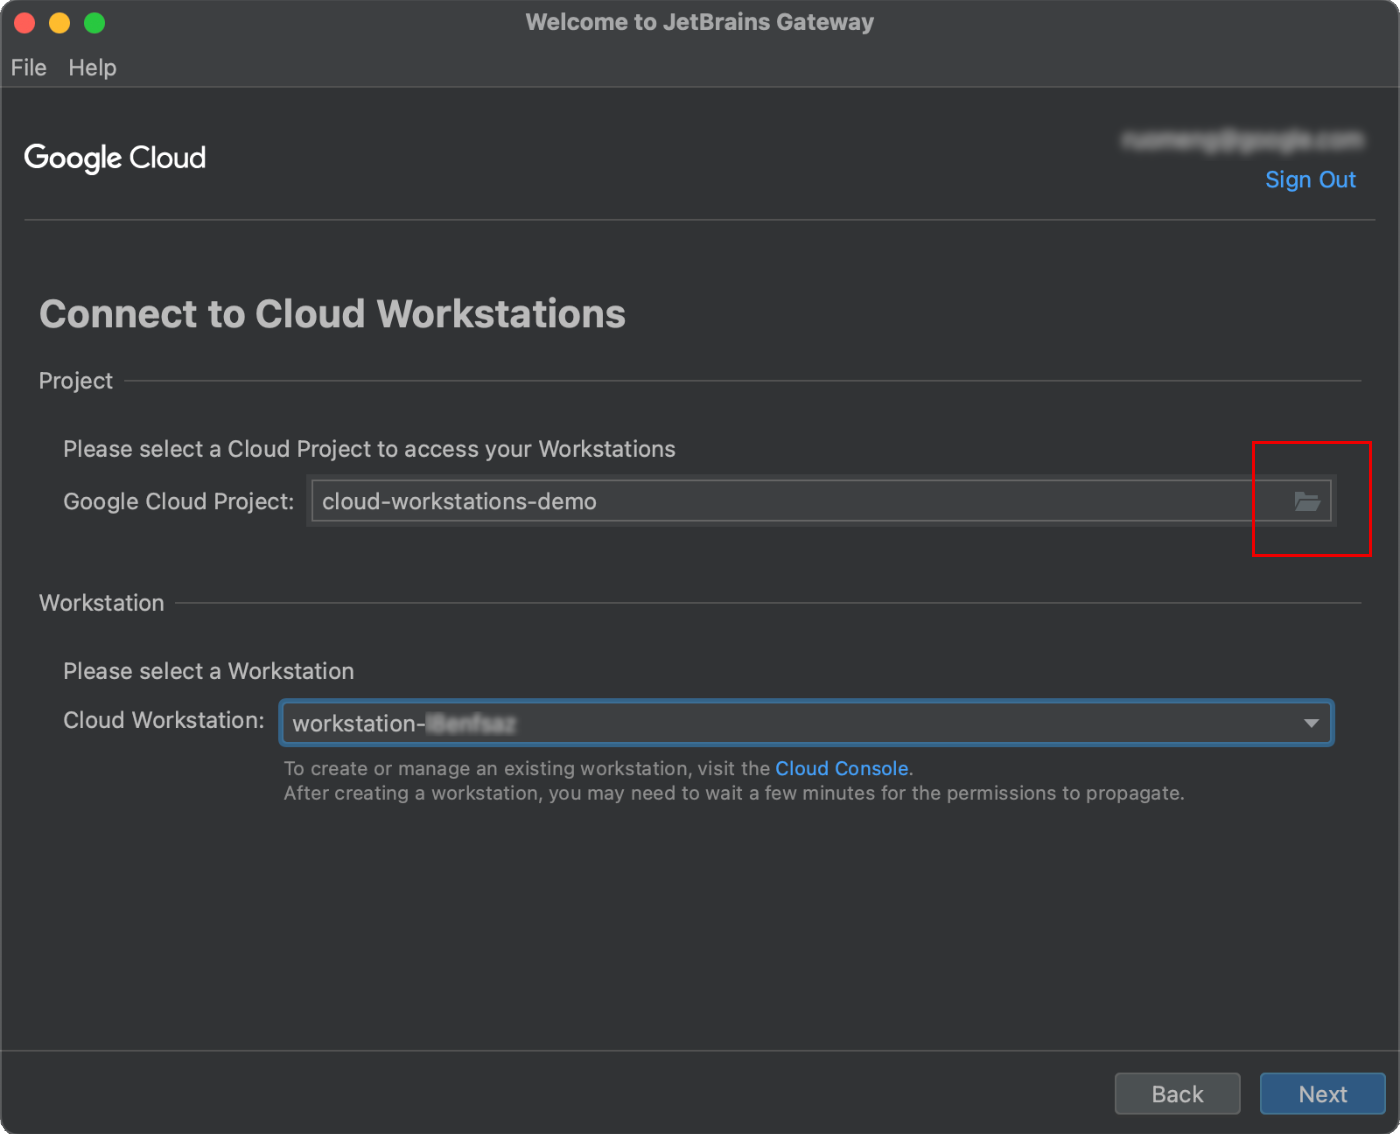 Conectar-se ao Cloud Workstations